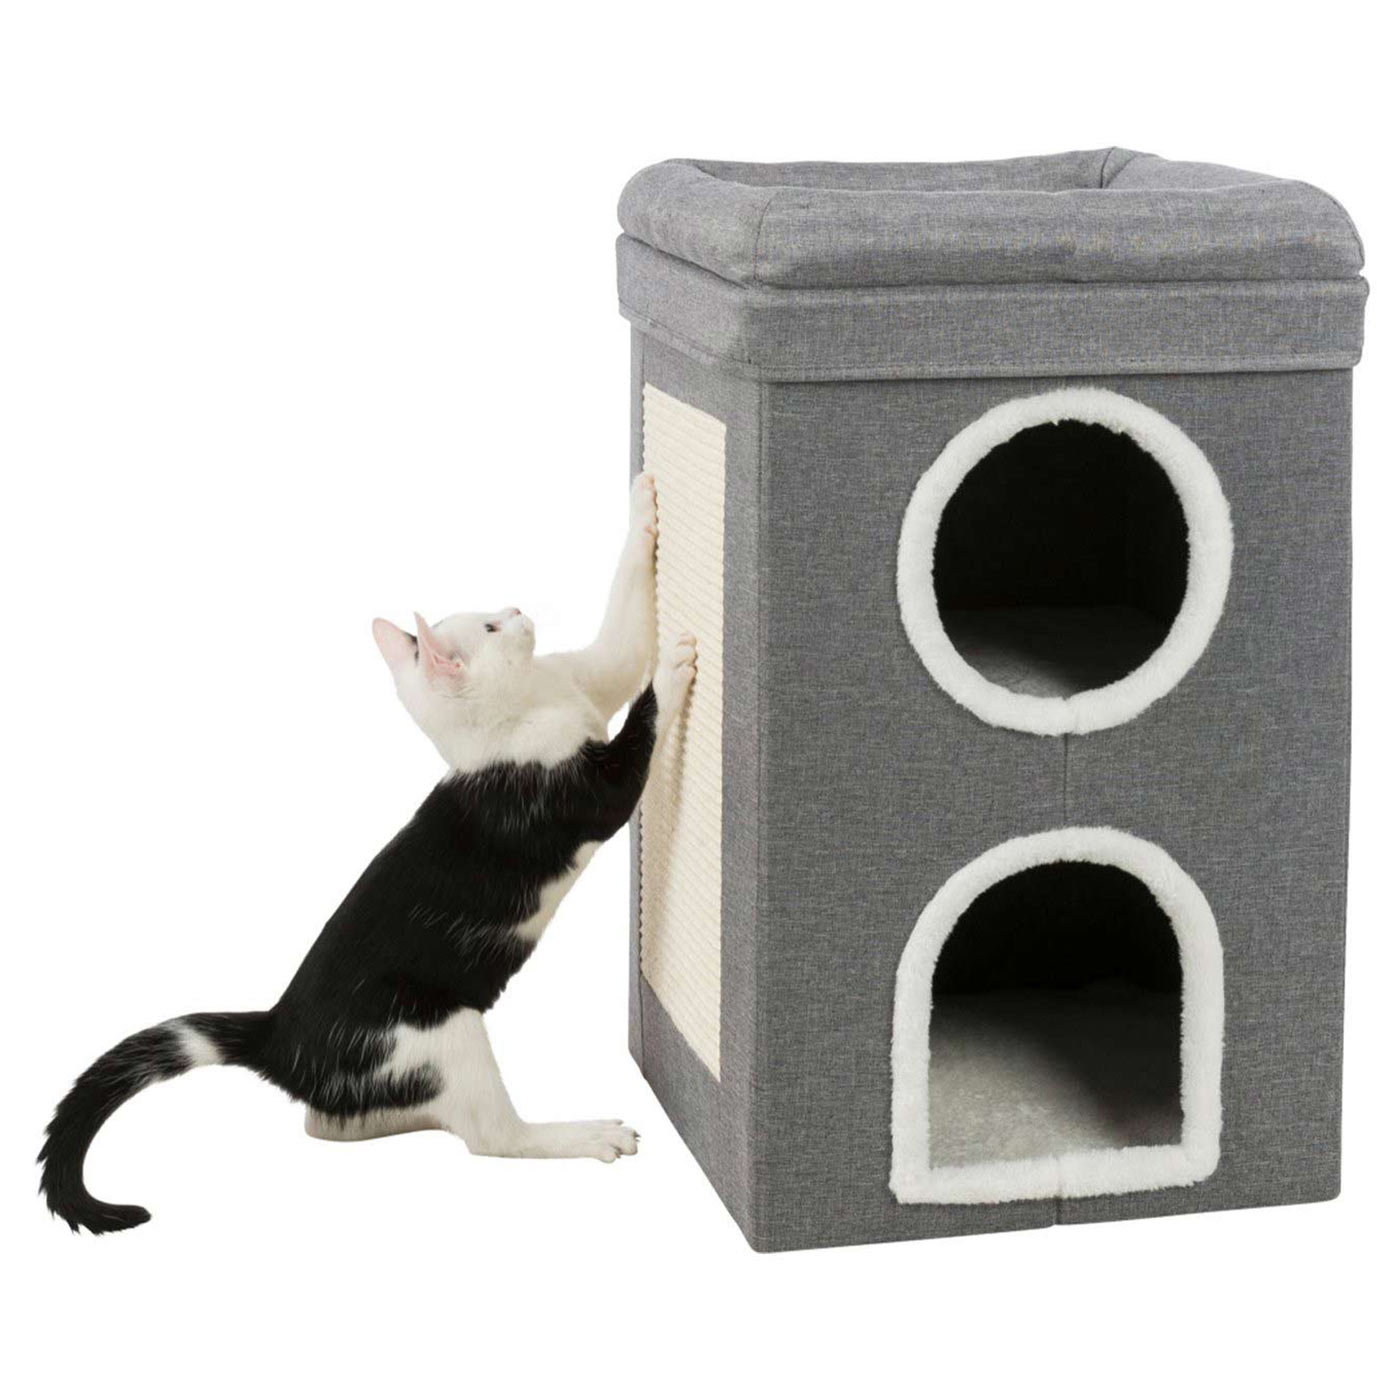 Trixie Grey & White Saul Cat Tower